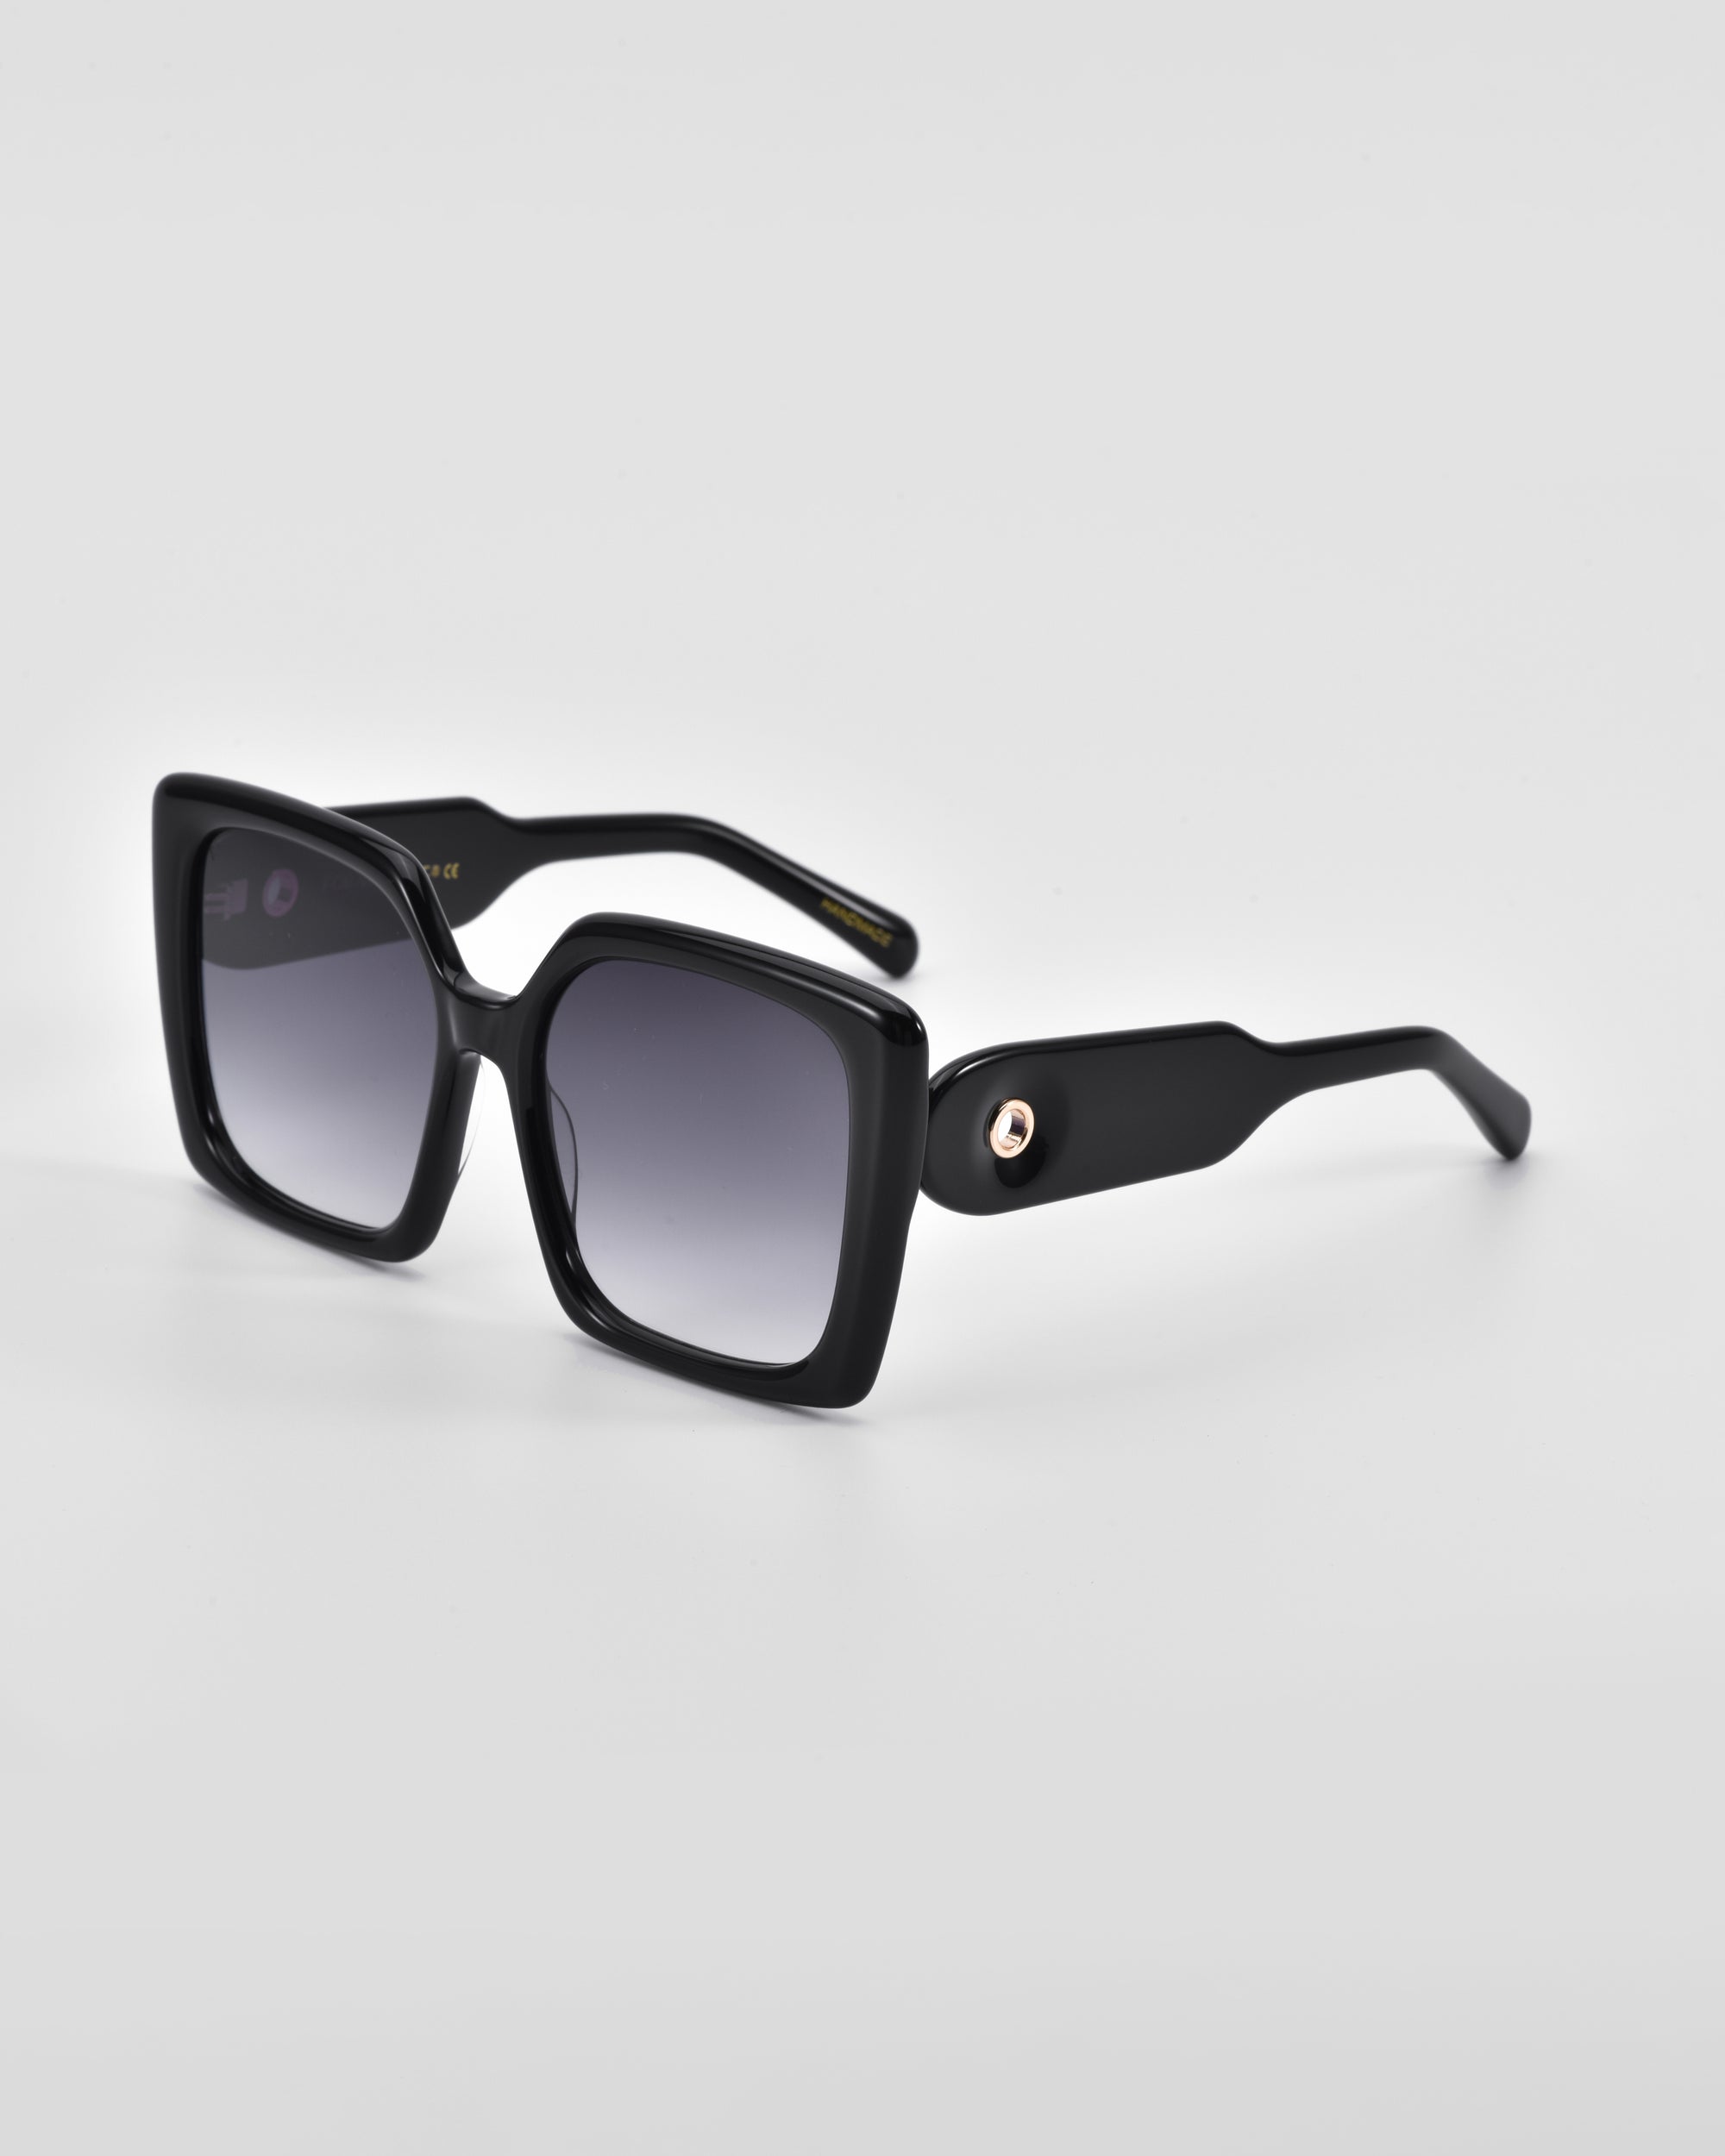 A pair of black oversized soft-square silhouette sunglasses with gradient dark lenses rests on a light grey surface. The arms of the sunglasses are thick and feature classic temple round details near the hinge. The overall design is sleek and modern. These are the Eos by For Art&#39;s Sake®.